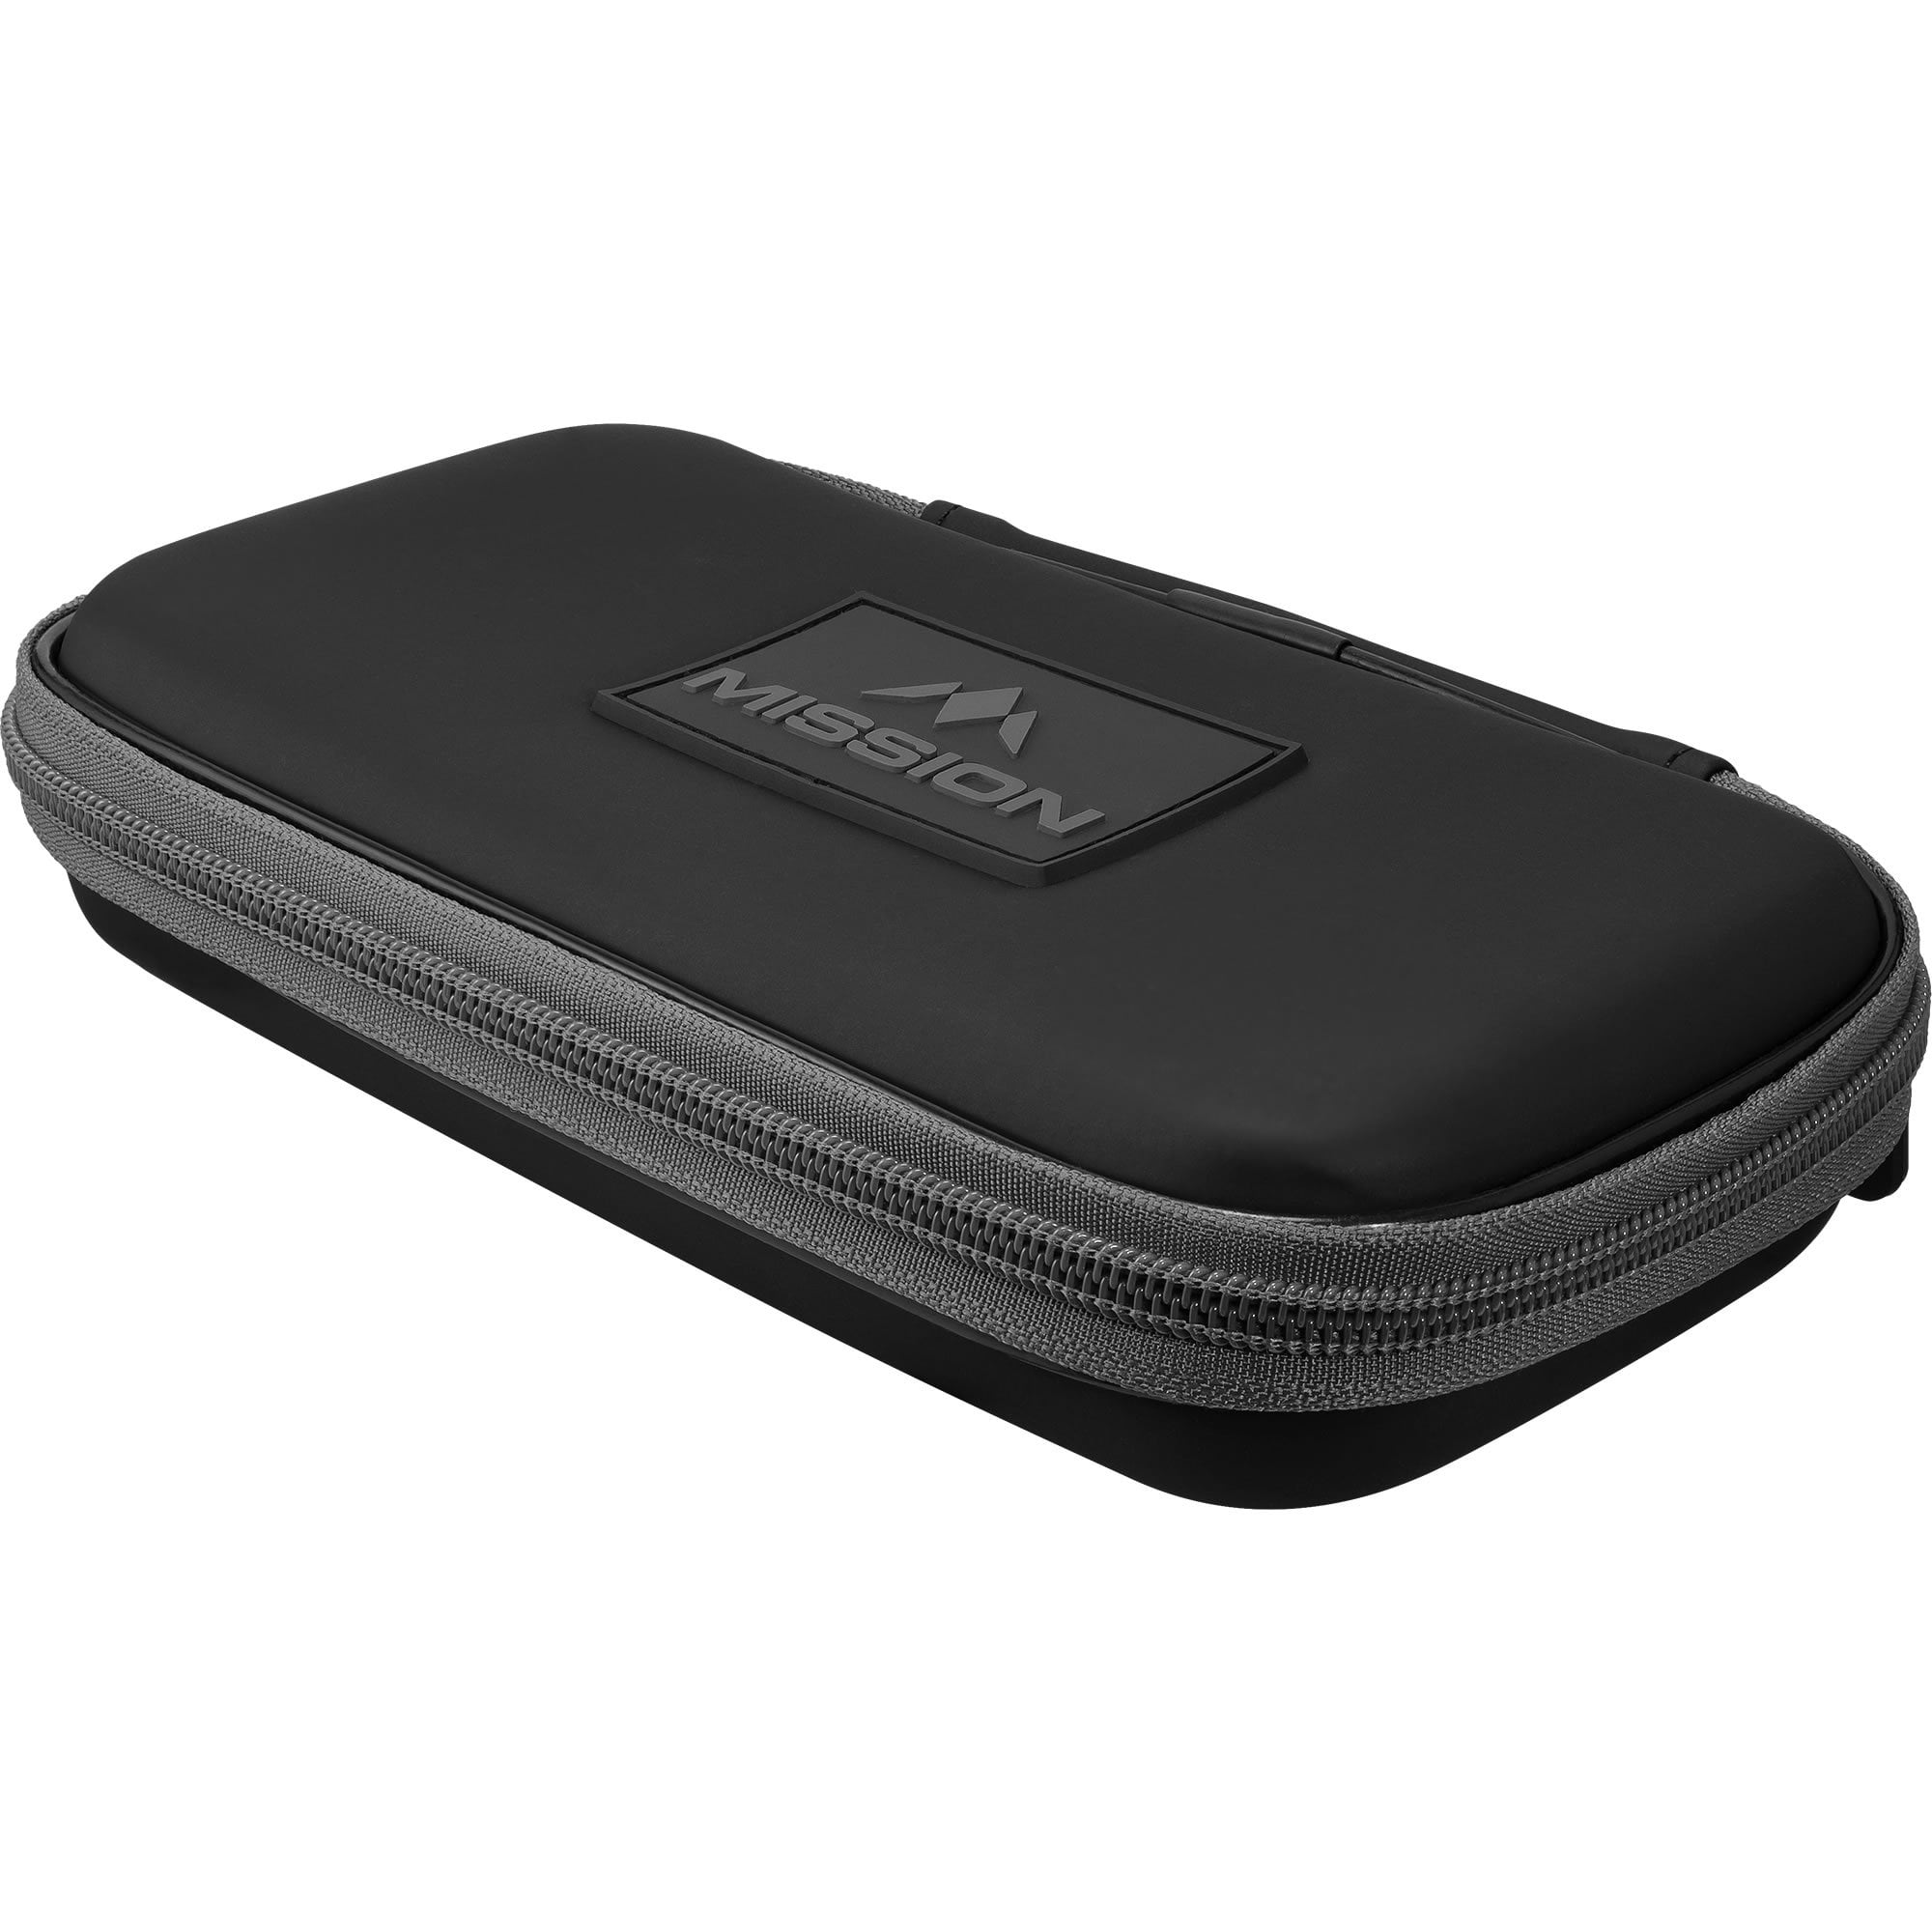 Mission Freedom XL Darts Case - Strong Protection